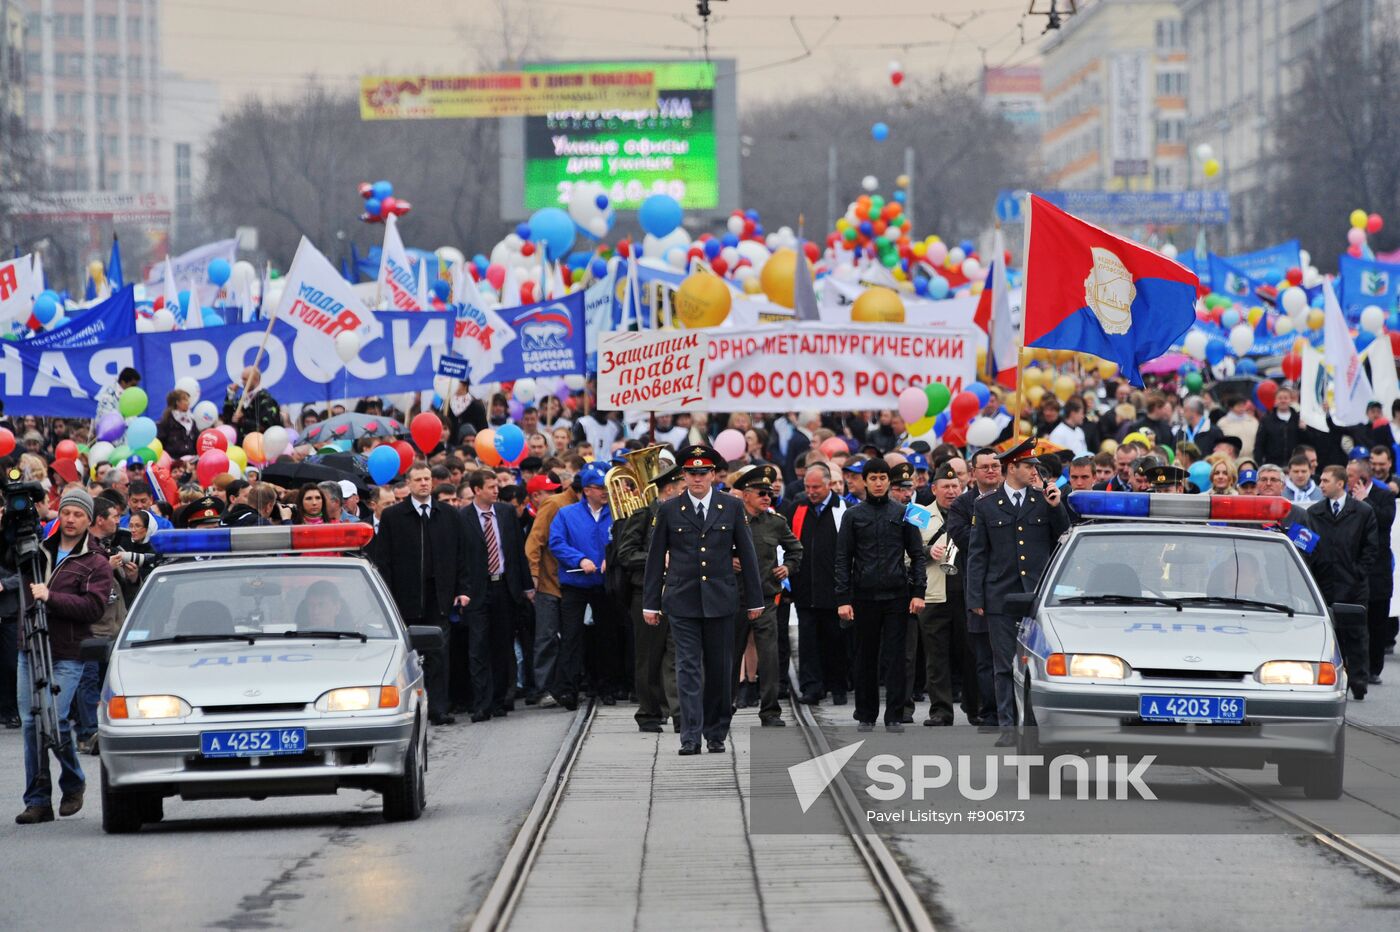 Labor Day demonstration of unions in Yekaterinburg